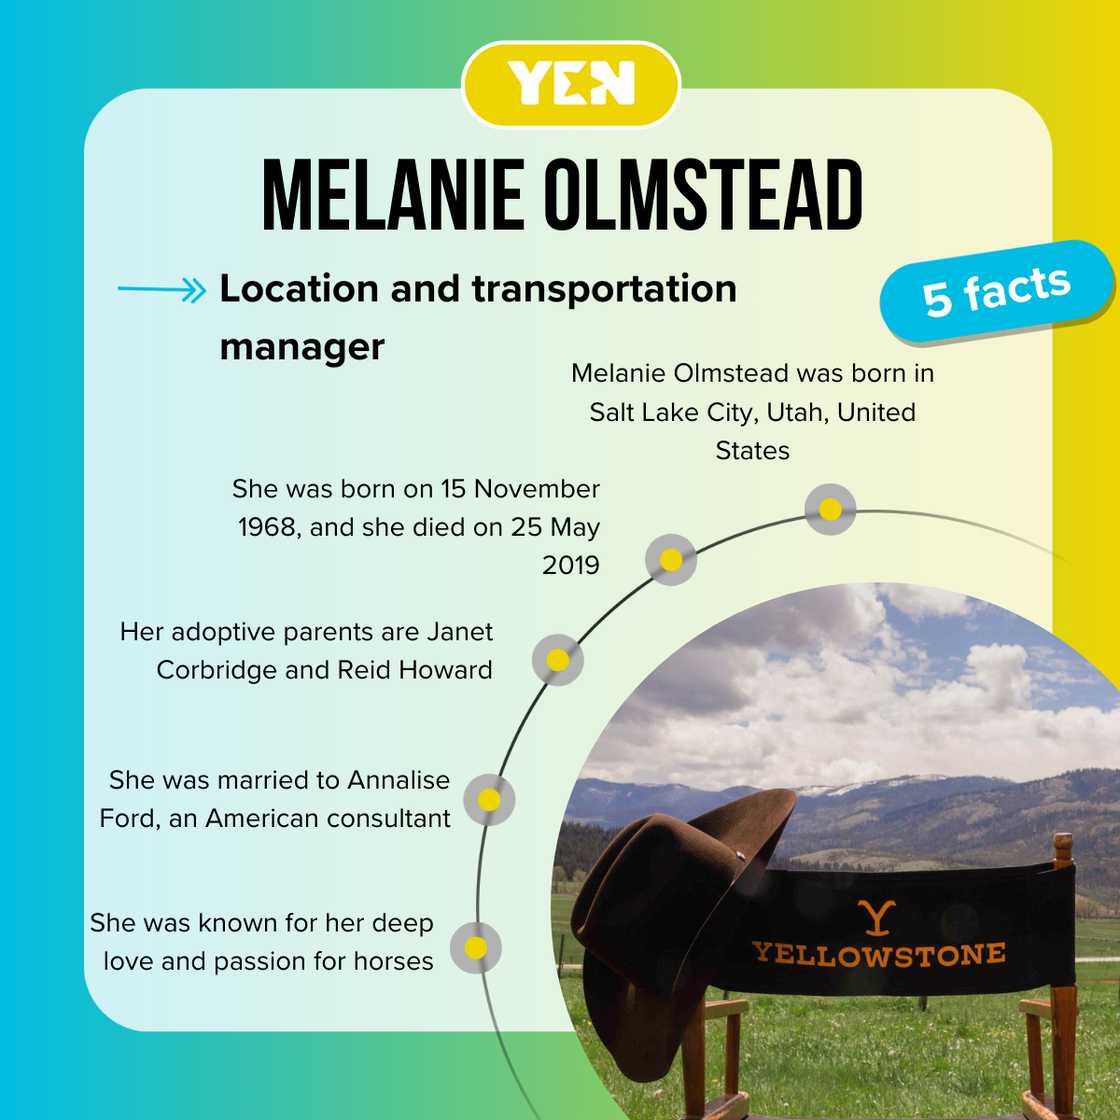 Five facts about Melanie Olmstead